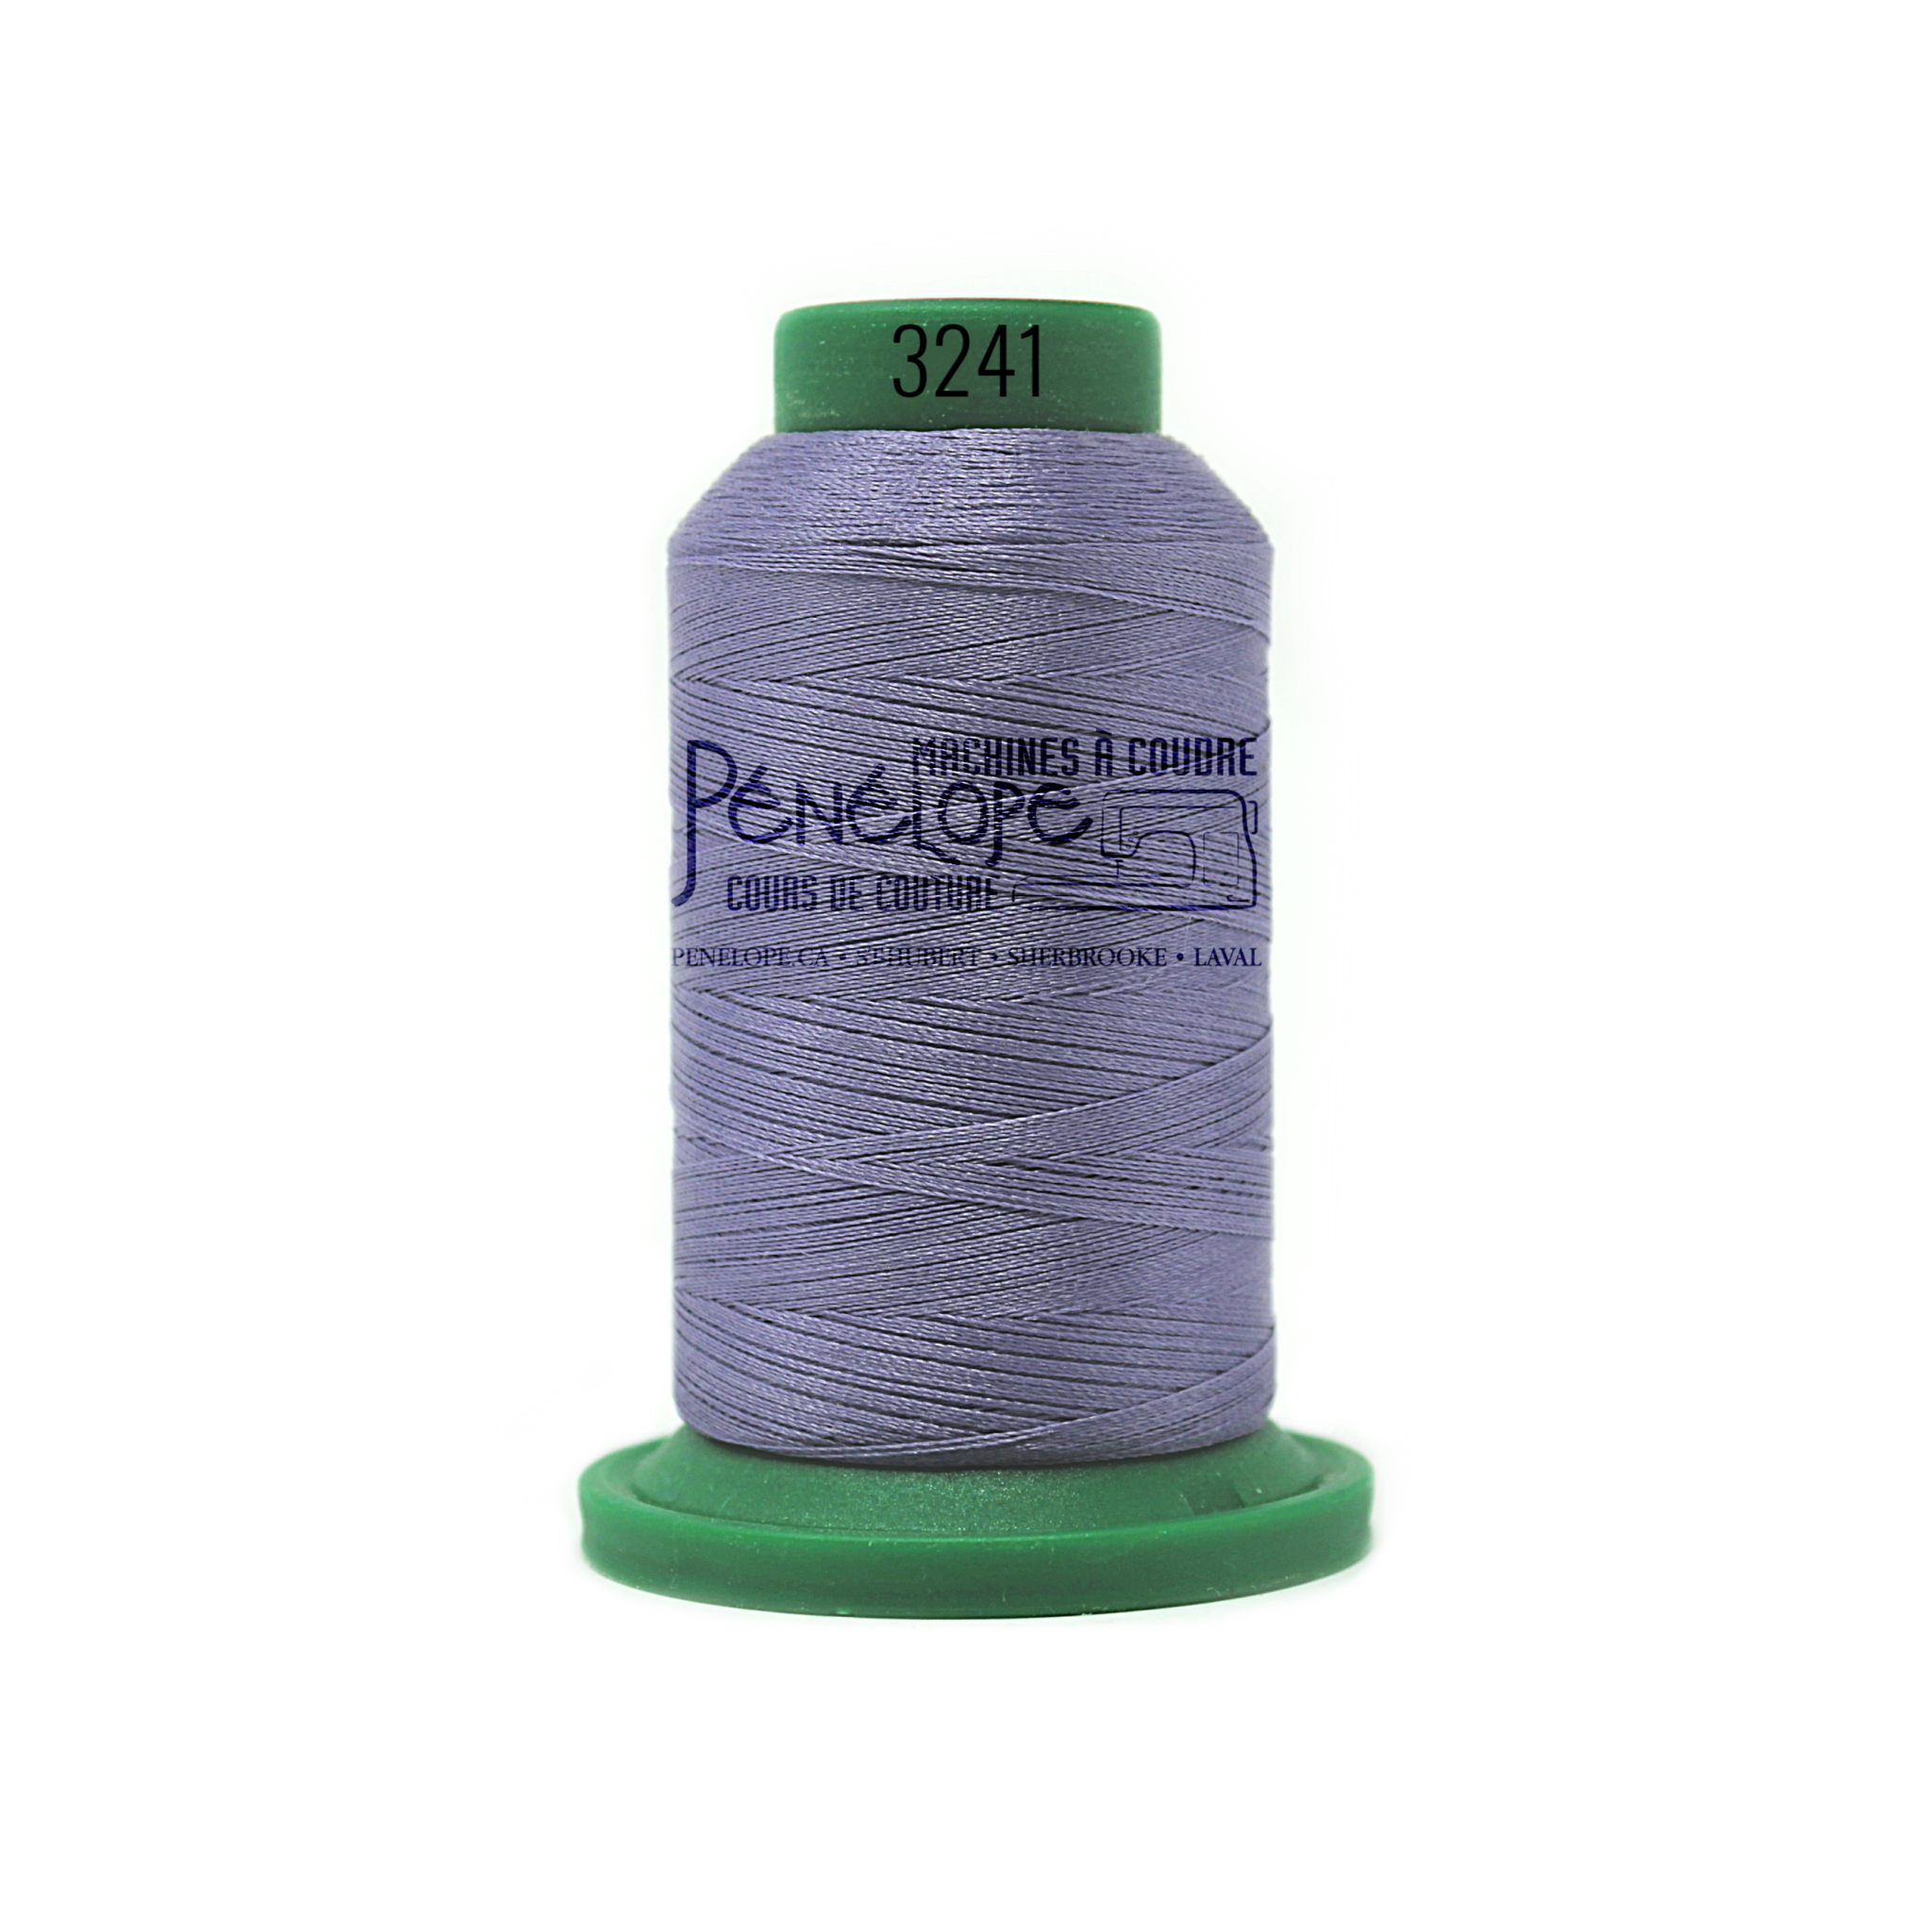 Isacord Isacord sewing and embroidery thread 3241